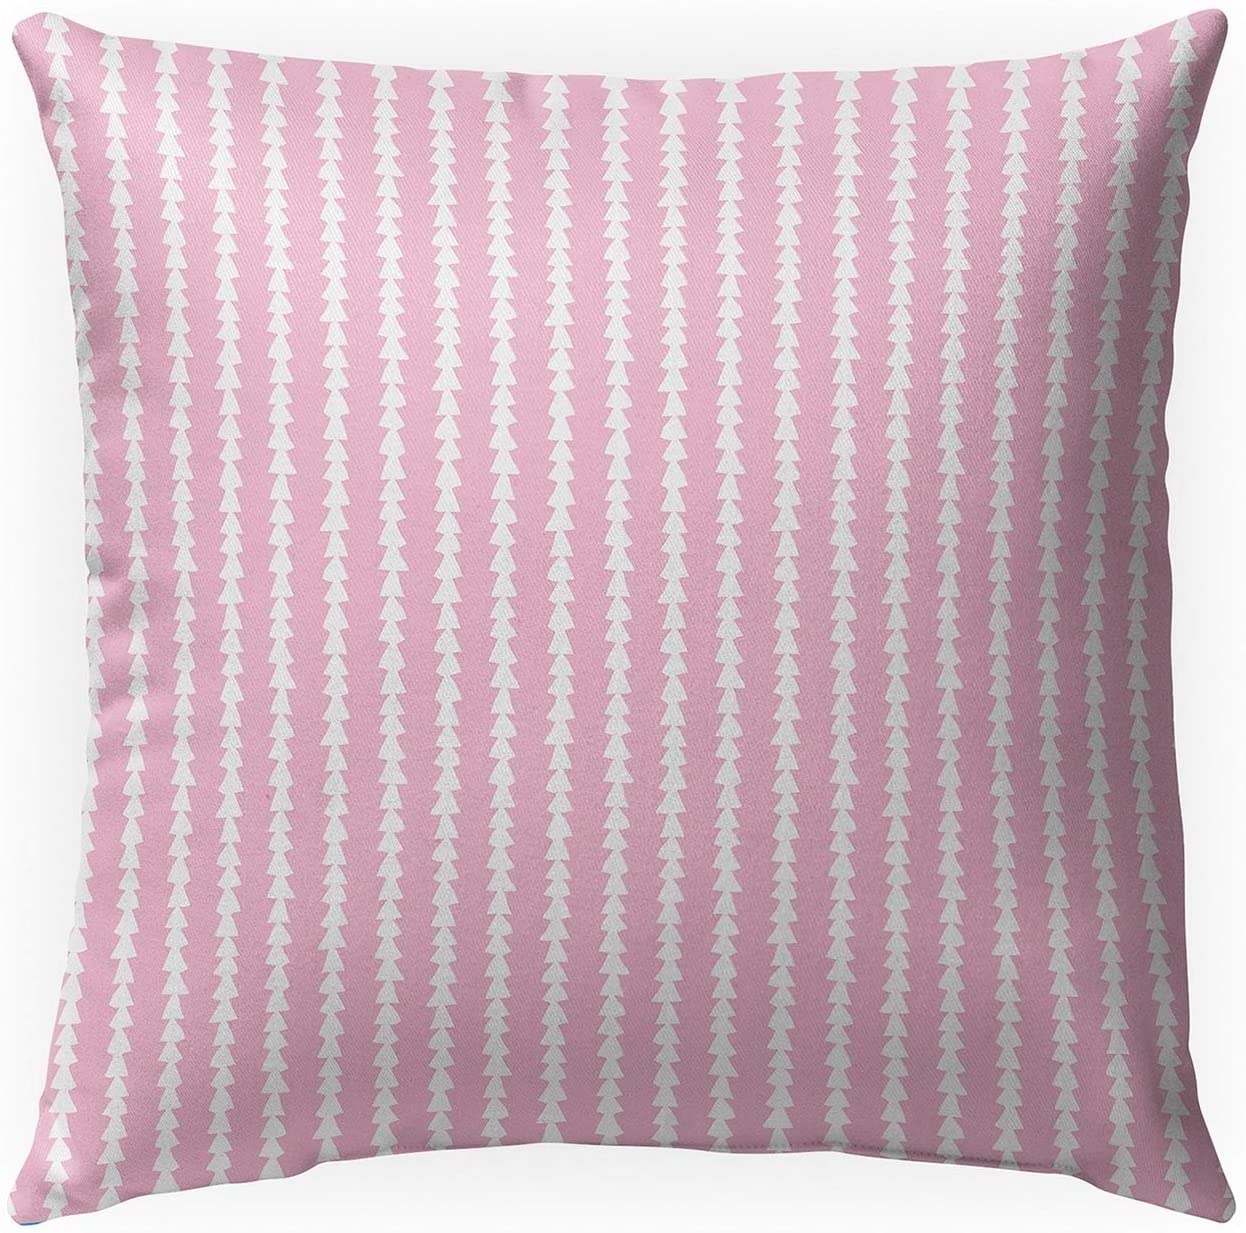 MISC Tiny Triangle Stripe Pink Indoor|Outdoor Pillow by 18x18 Pink Geometric Southwestern Polyester Removable Cover